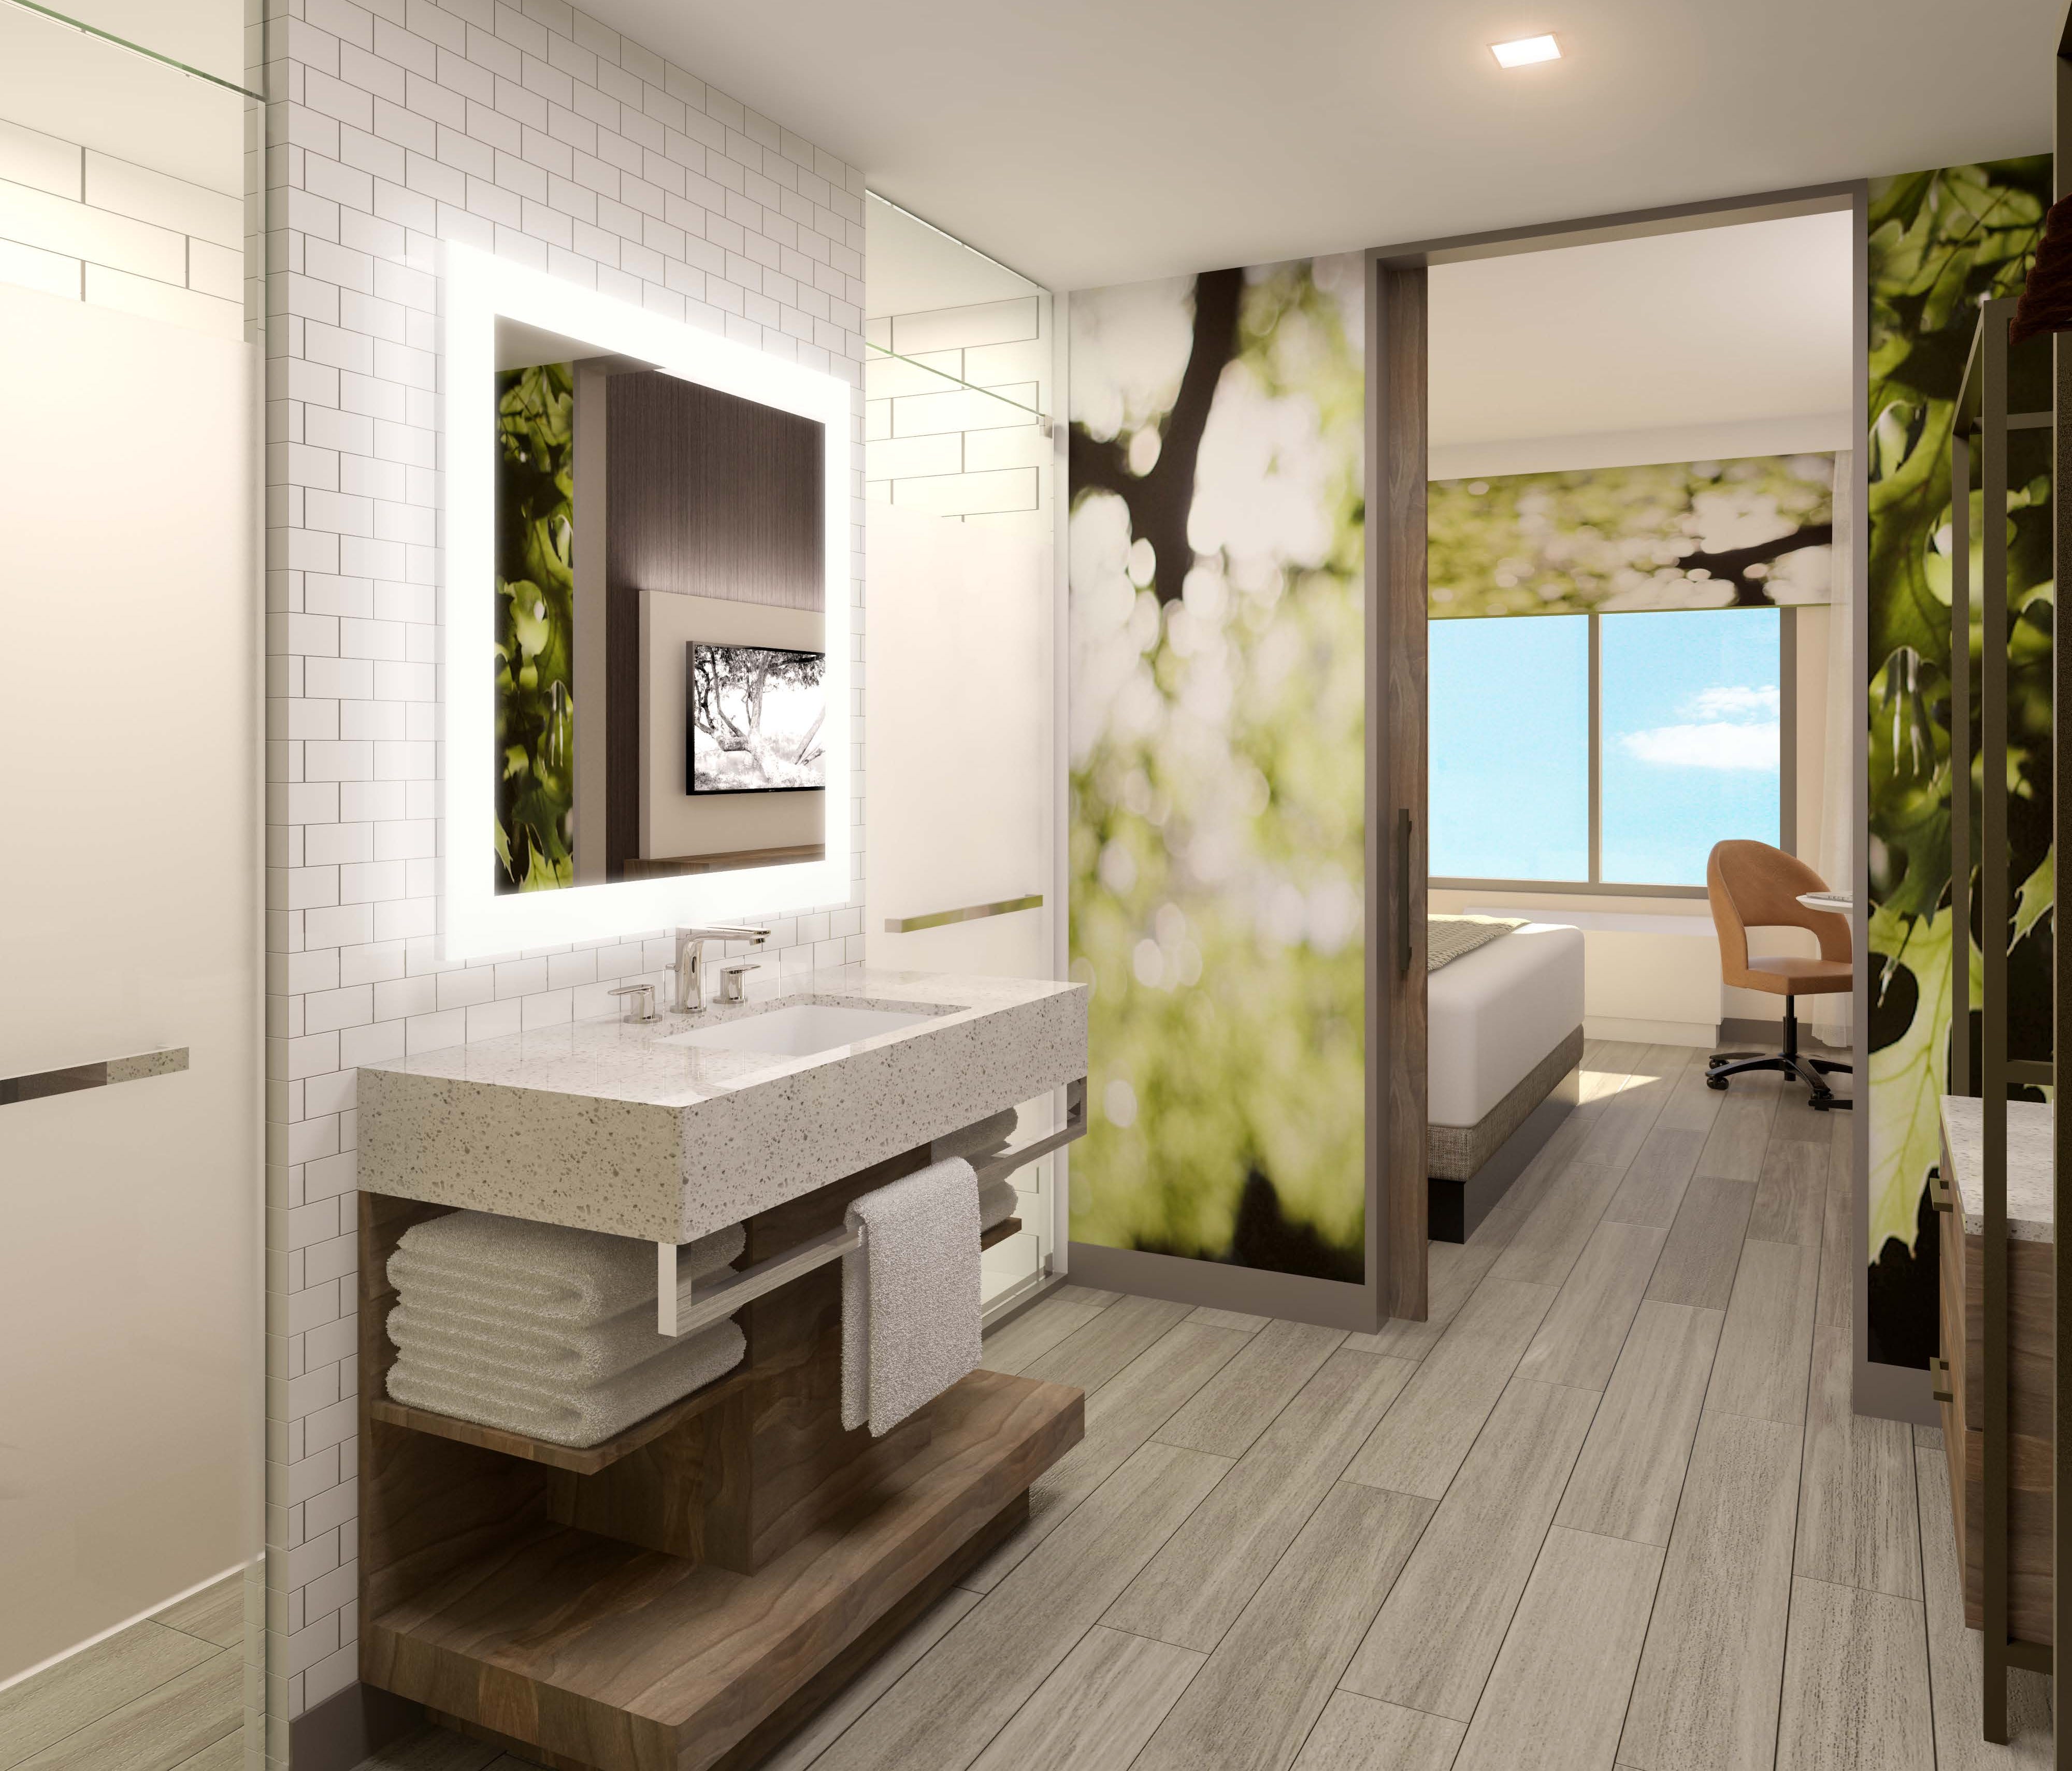 Hotels are getting more creative with guestroom bathrooms, including Wyndham Hotel Group, which has open layouts.